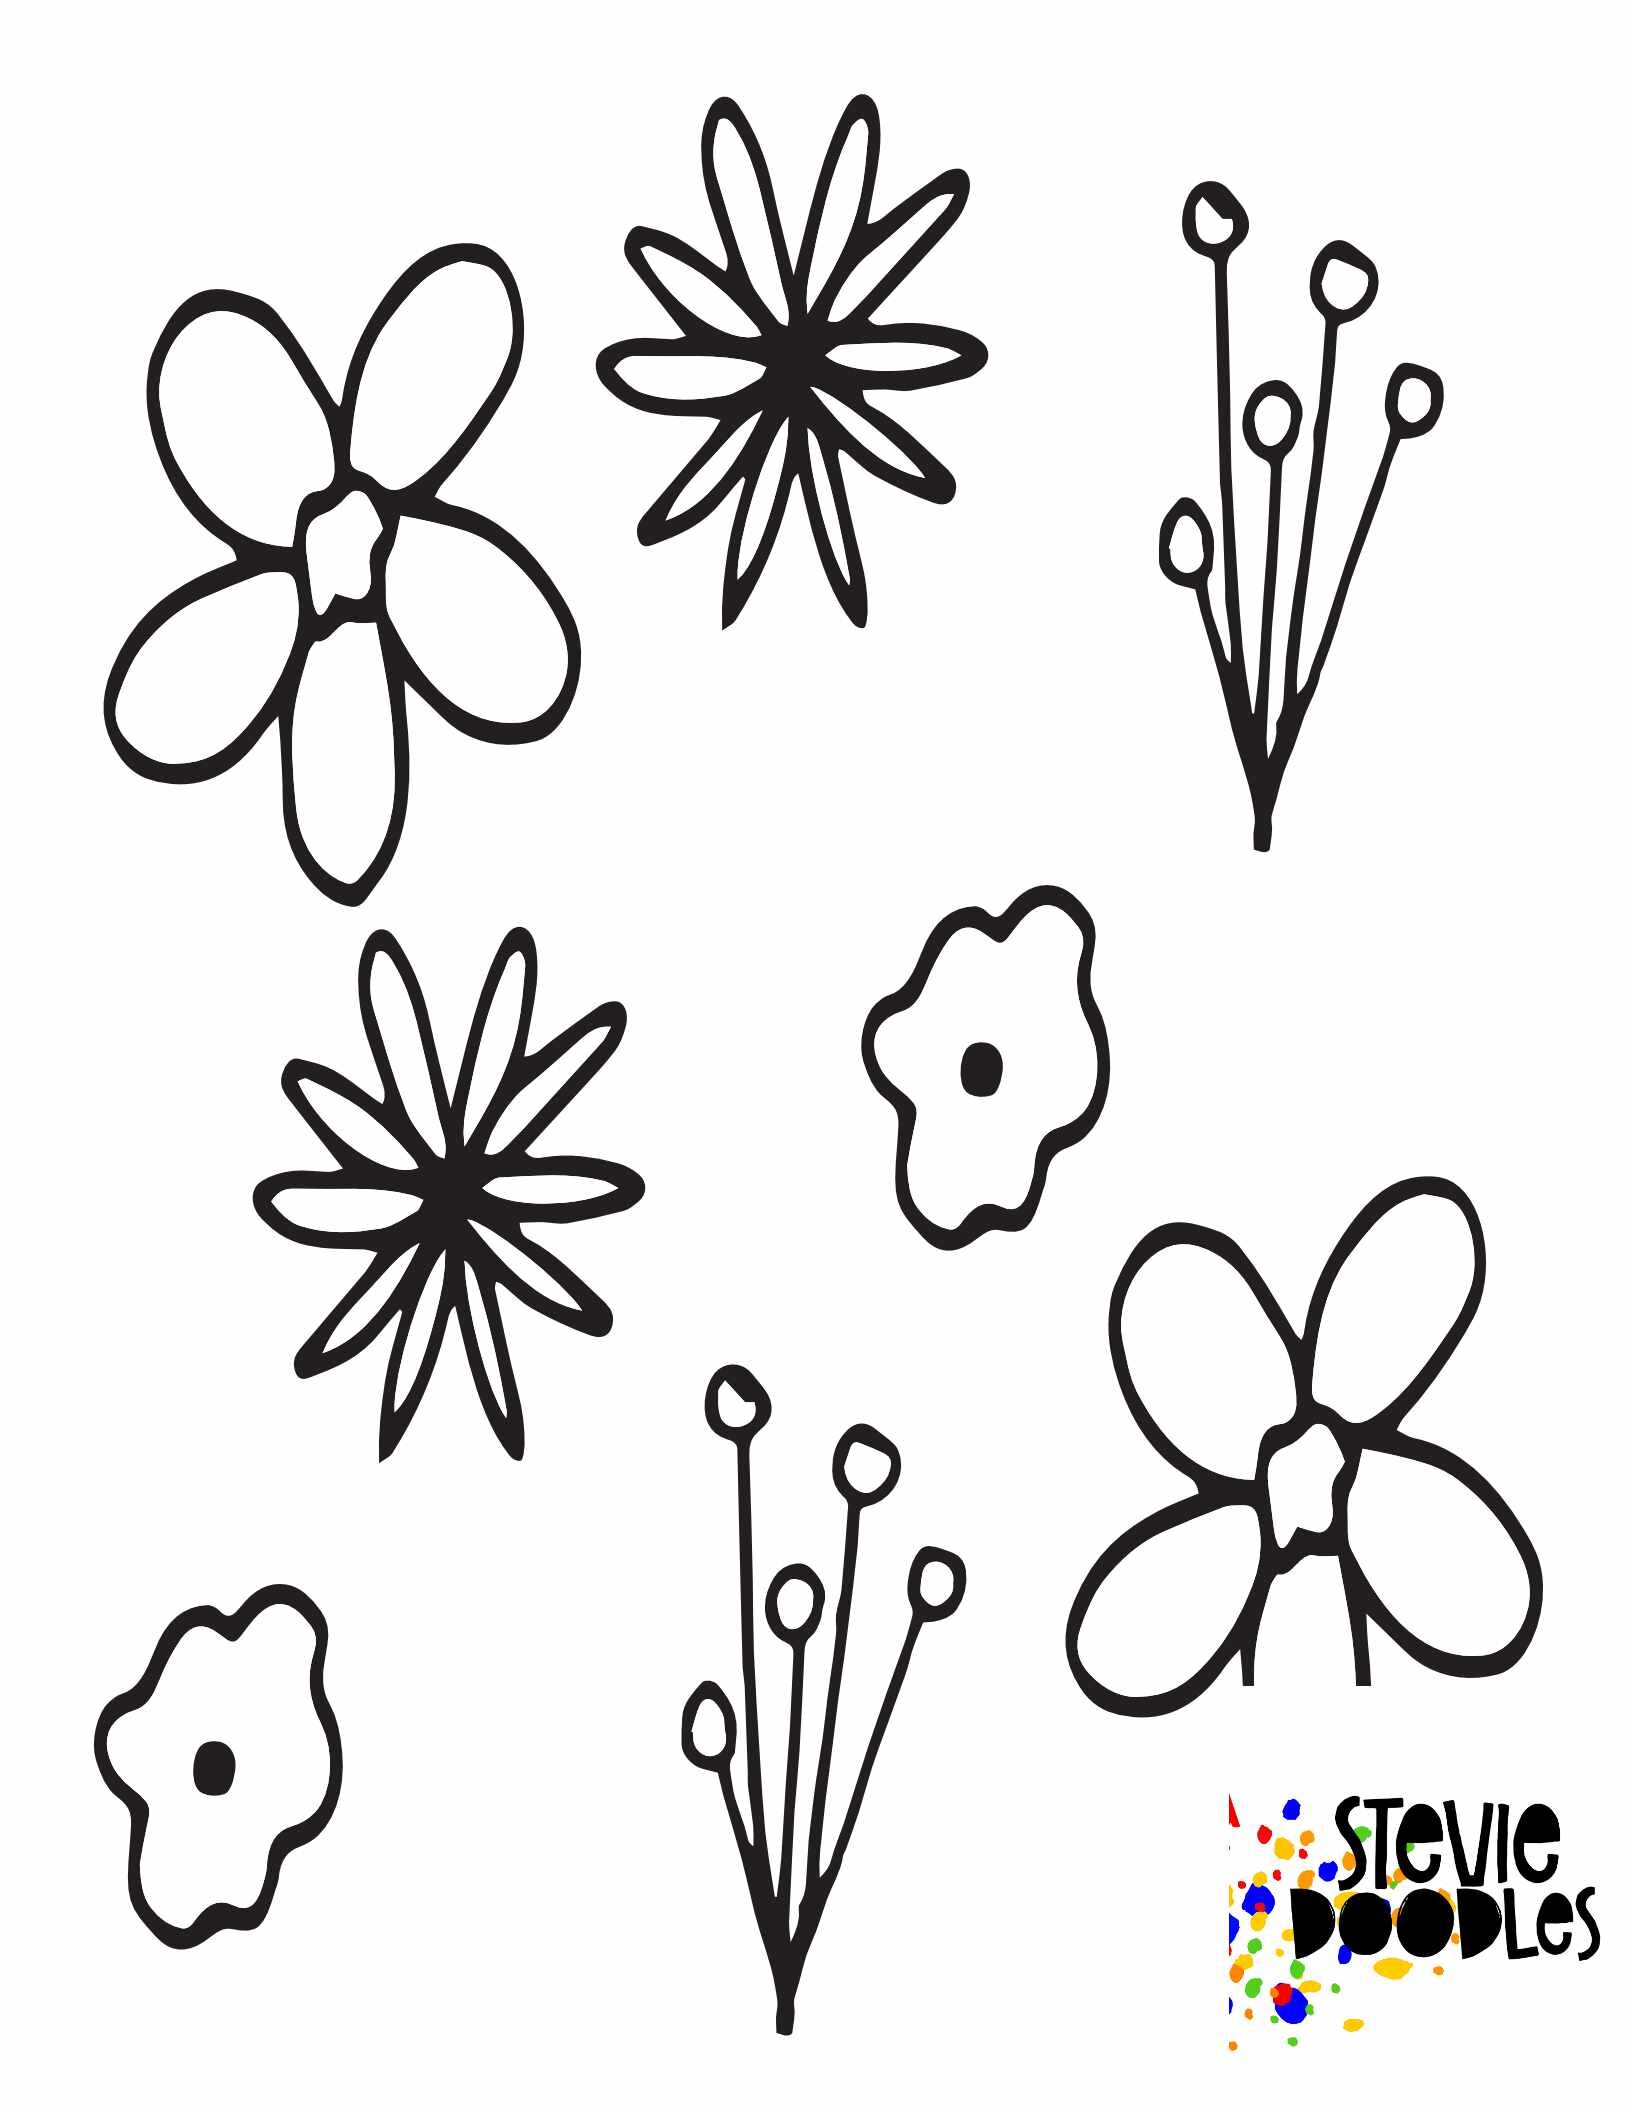 10 Free Simple Flower Coloring Pages Over 1000 free coloring pages at Stevie Doodles